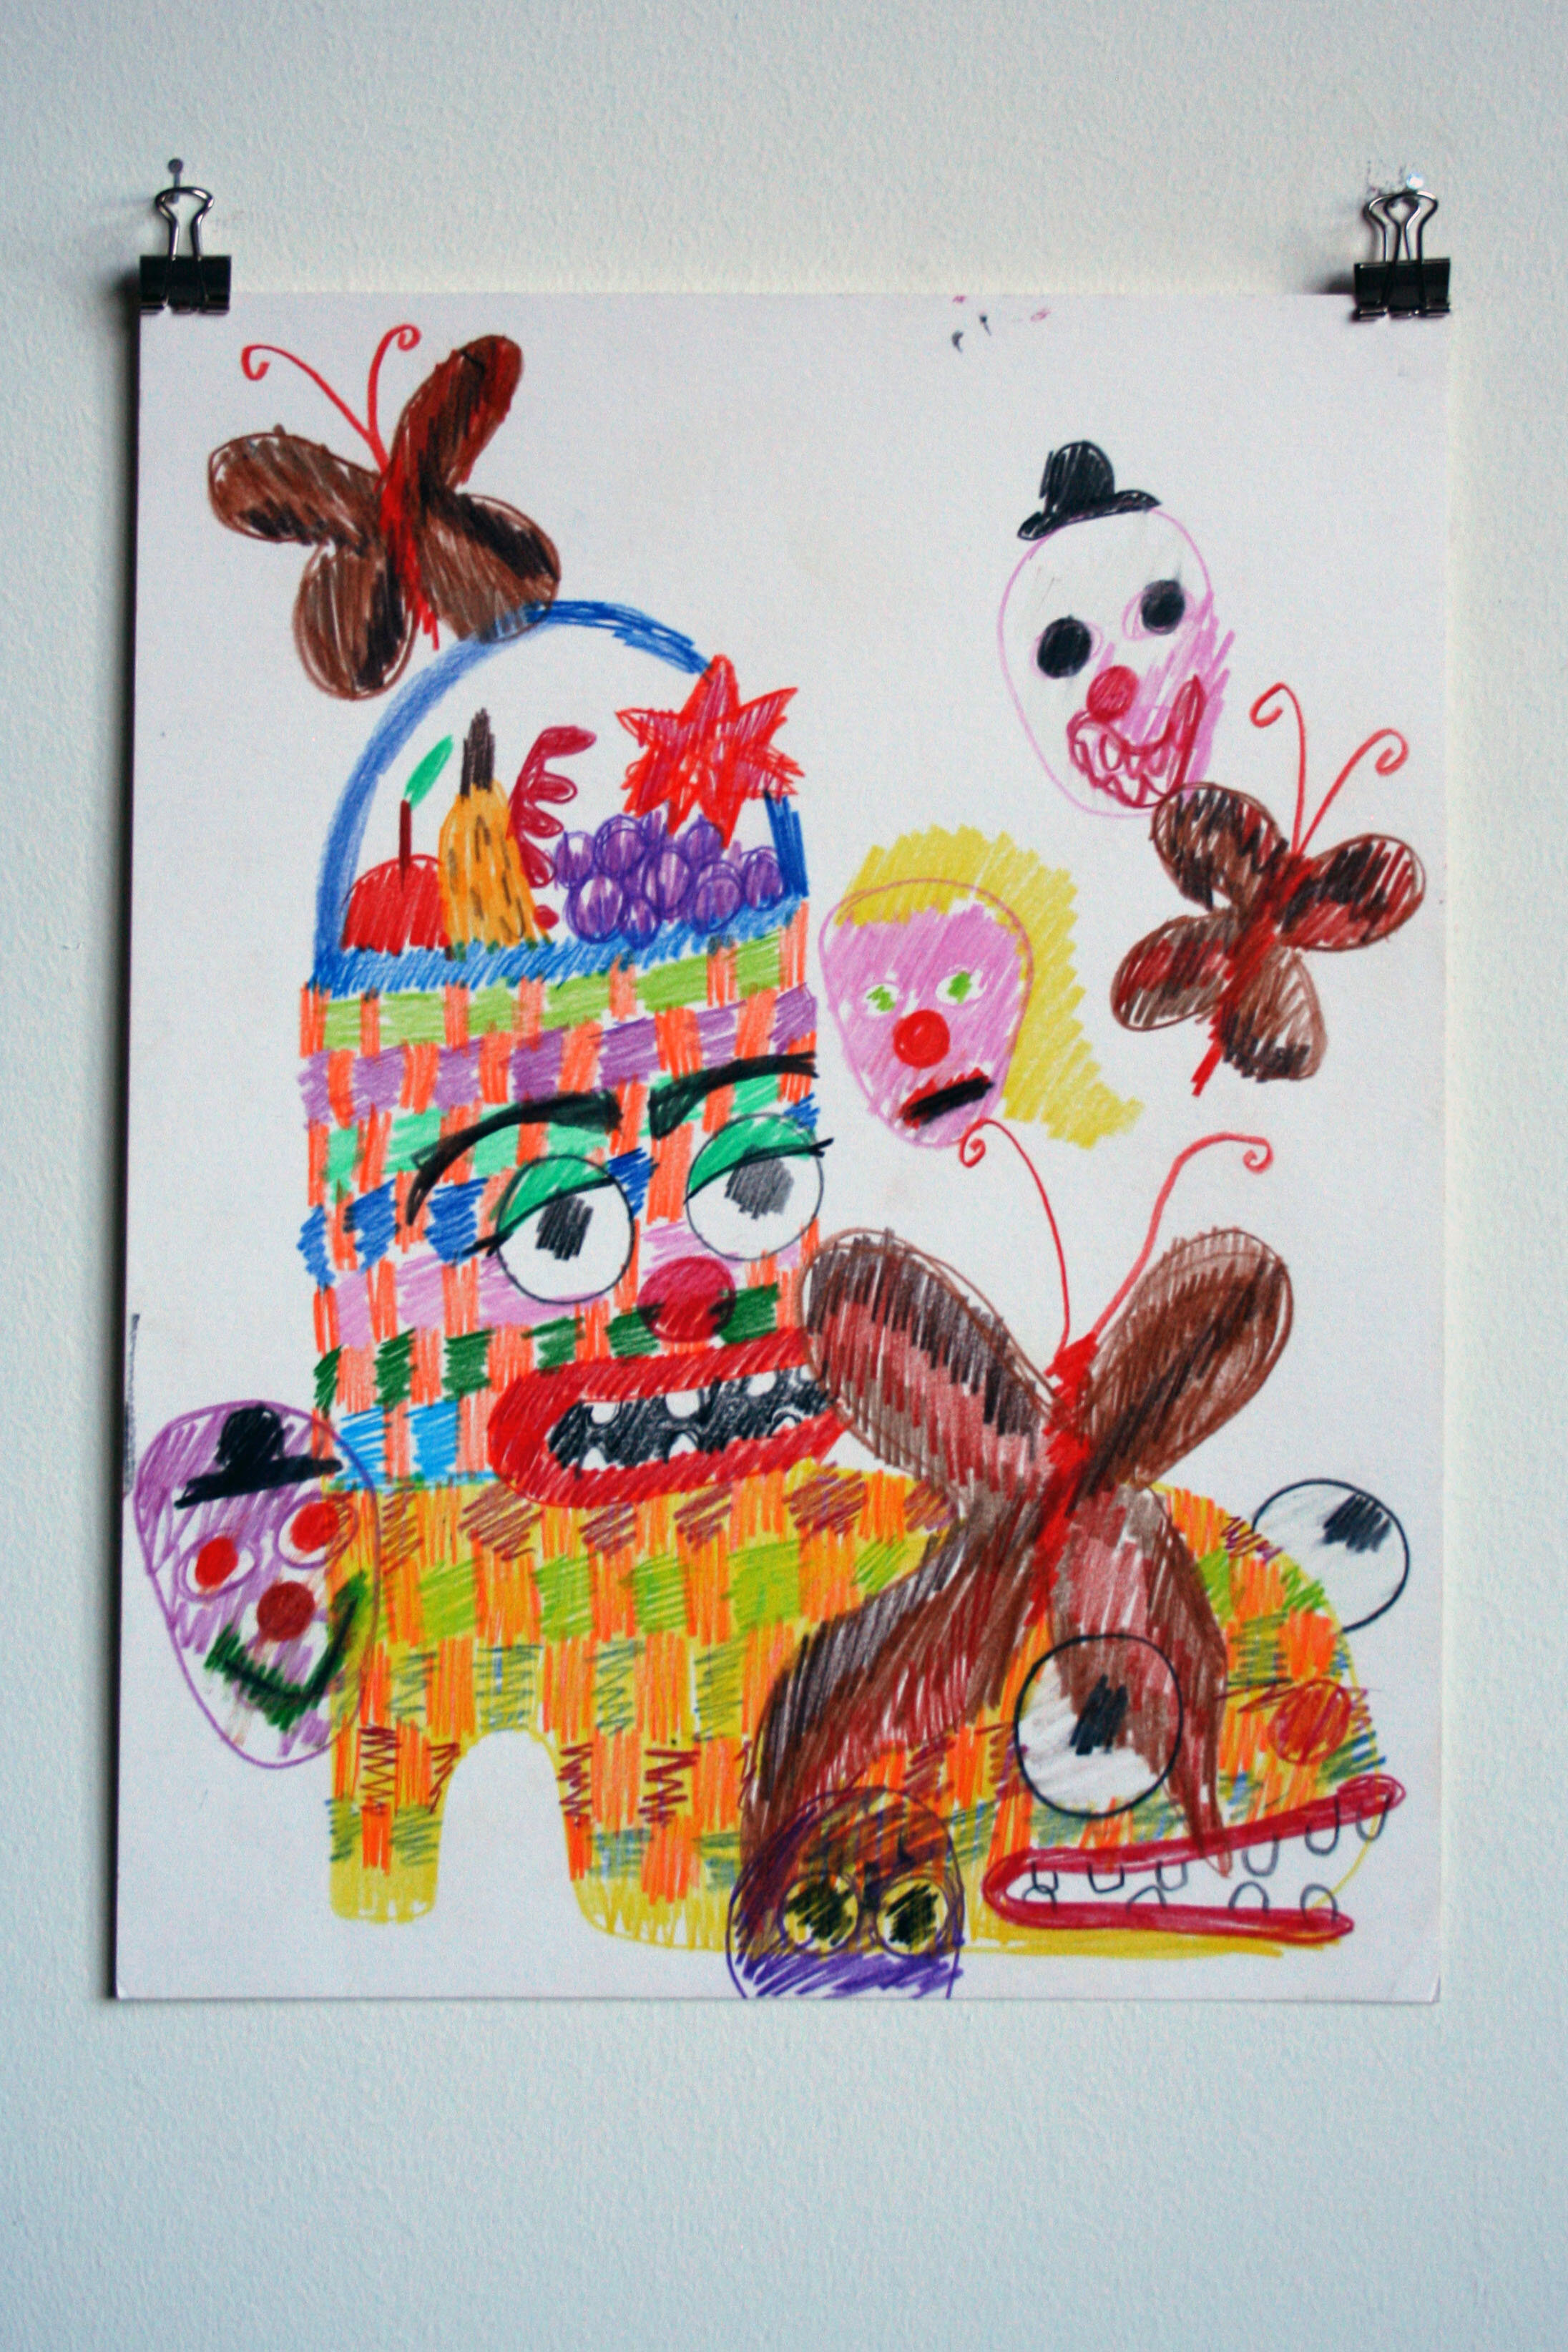   Gift Basket Puppet Shoe Puppet ,  2013  14 x 11 inches (35.56 x 27.94 cm.)  Colored pencil on paper 